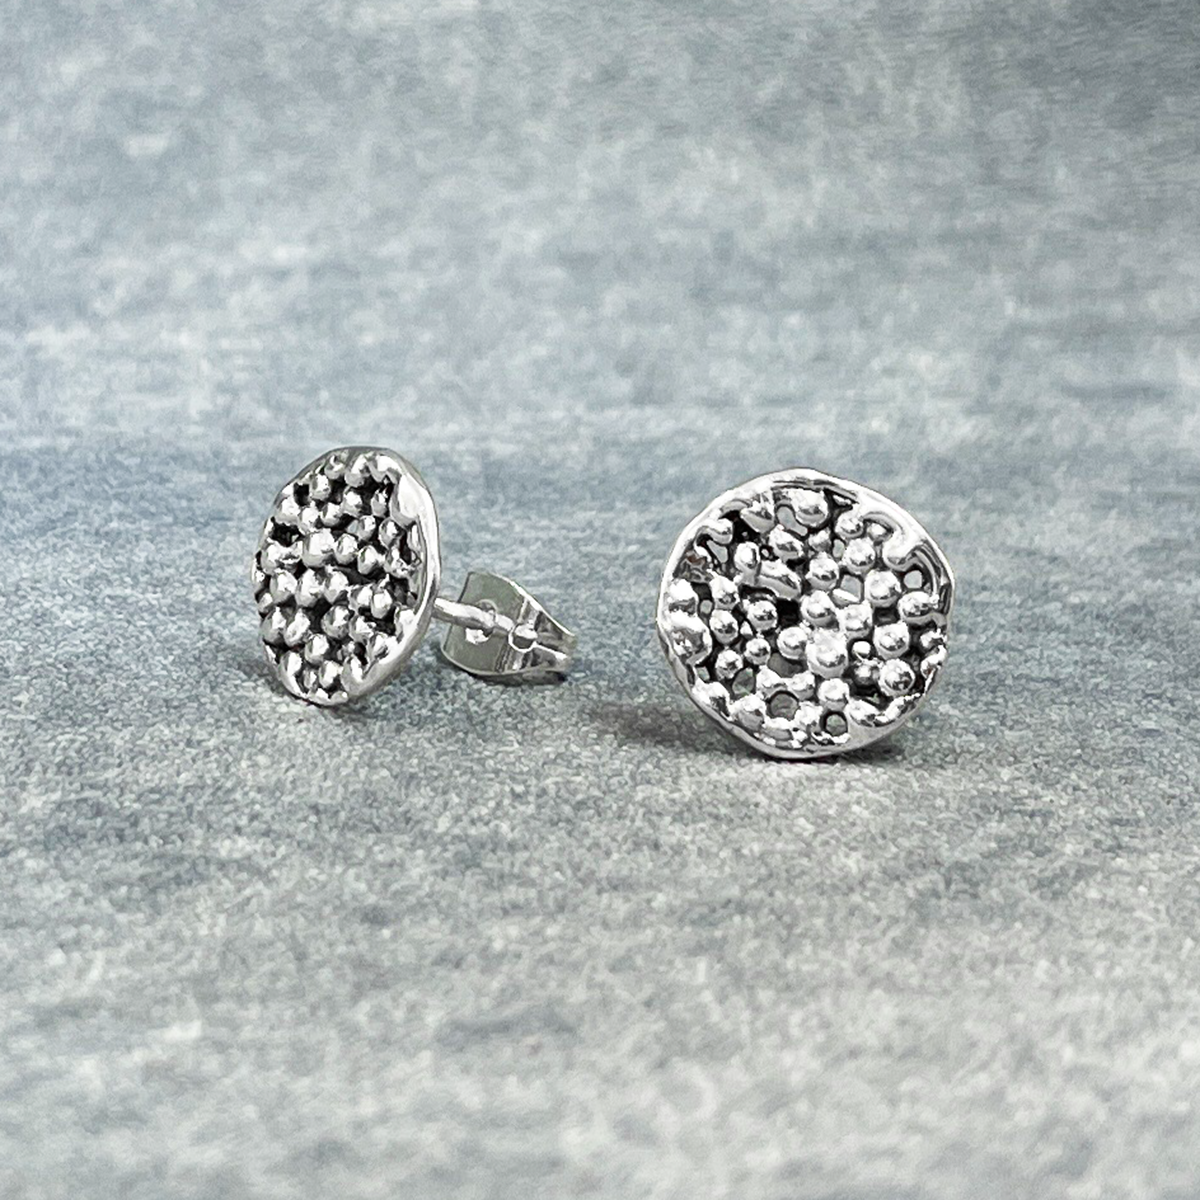 Uisce - Sea Foam Silver Earrings - Stud, meticulously handcrafted with sterling silver and boasting a high-polished finish. These earrings feature a unique texture resembling sea foam.  Expertly handmade with a thickness of 2 millimeters, they also feature sterling silver friction posts. Measuring 12 millimeters in diameter.